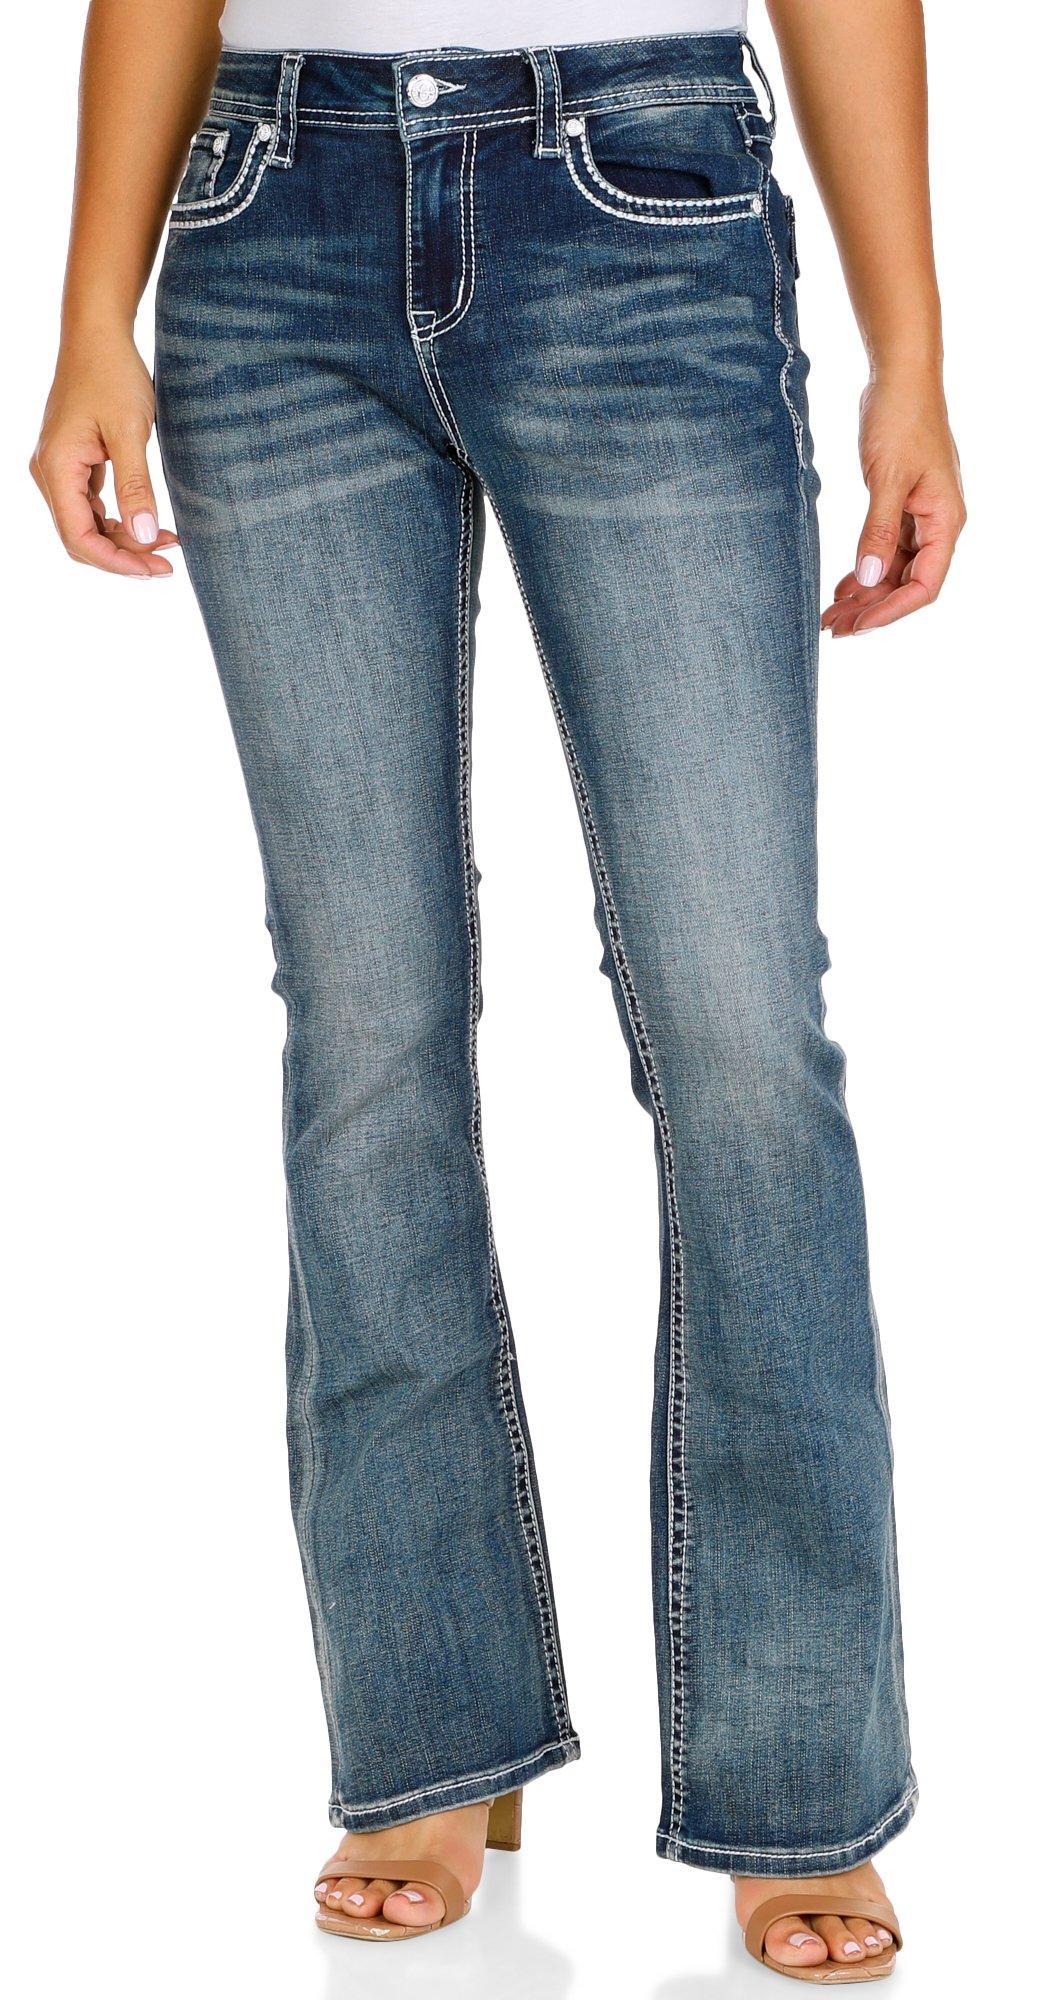 Women's Easy Fit Stitch Boot Cut Jeans